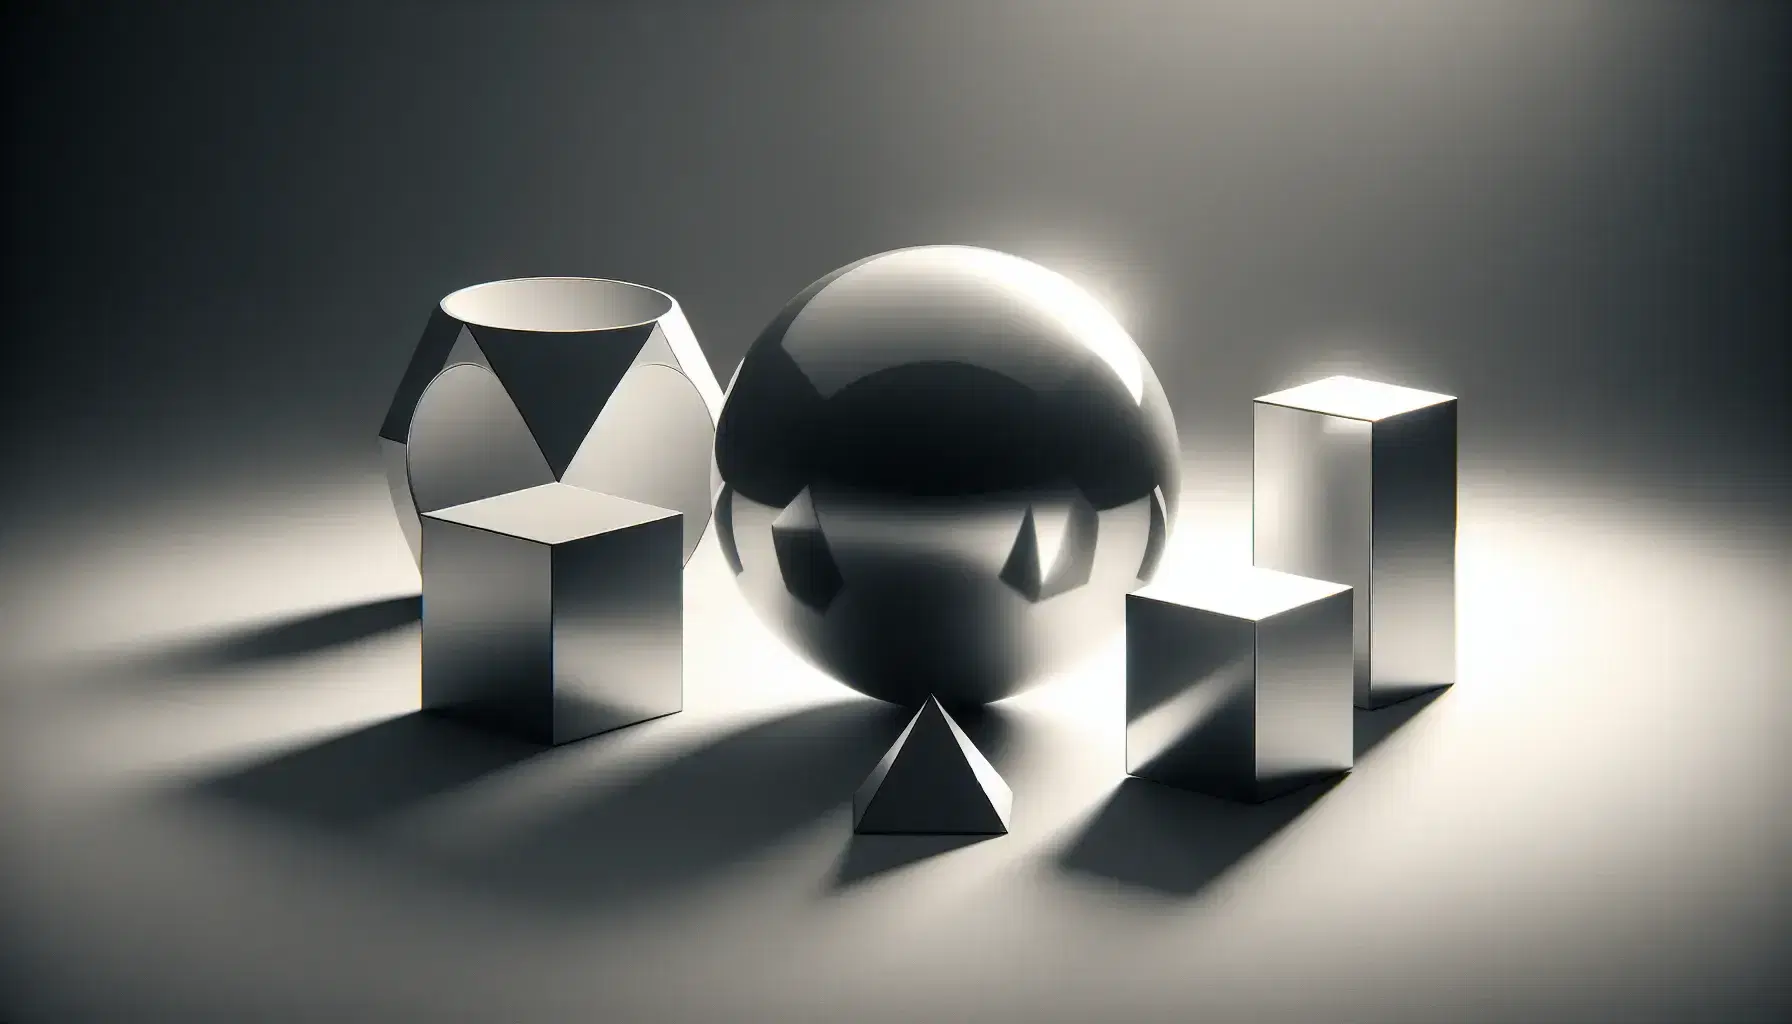 Collection of geometric solids on a matte surface, featuring a reflective sphere, a tetrahedron, a cube, and a cylinder with soft lighting and neutral background.